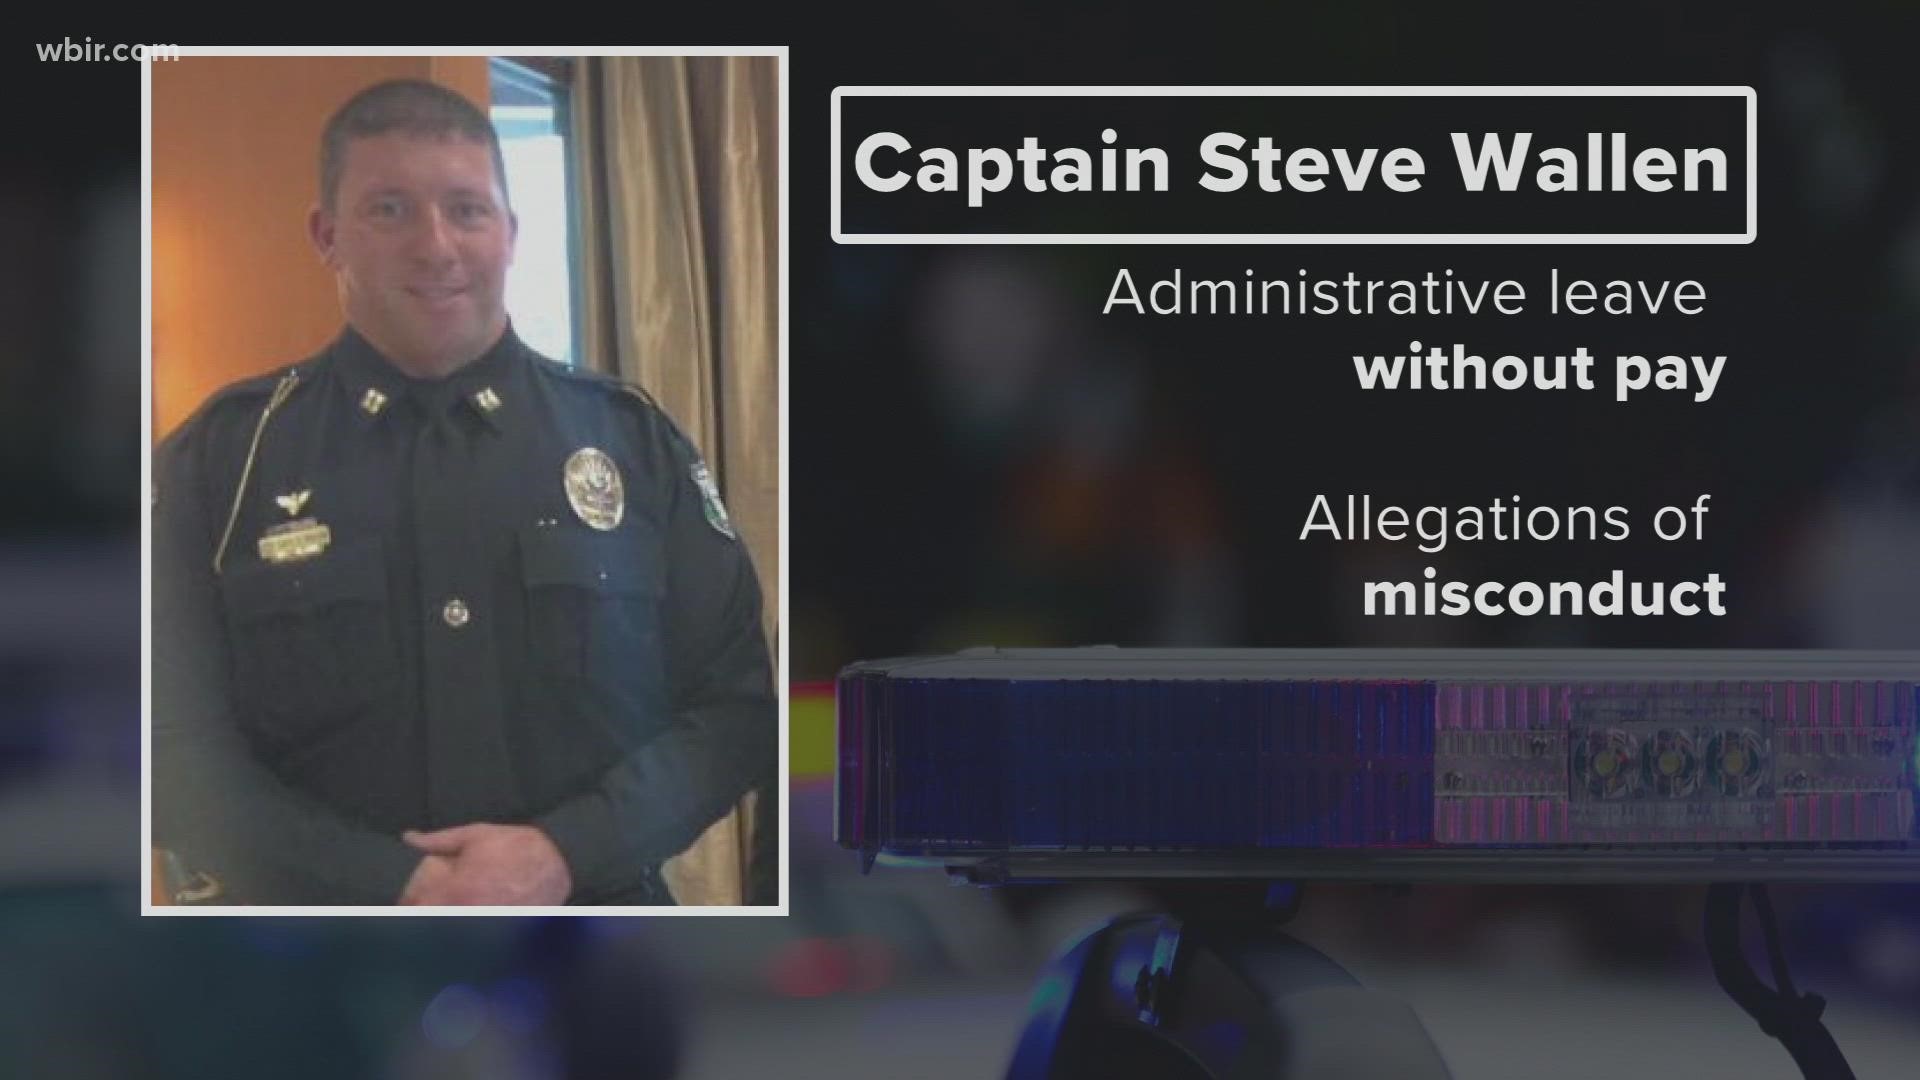 District Attorney General Jared Effler said he asked the TBI to investigate allegations of misconduct by Captain Steve Wallen.